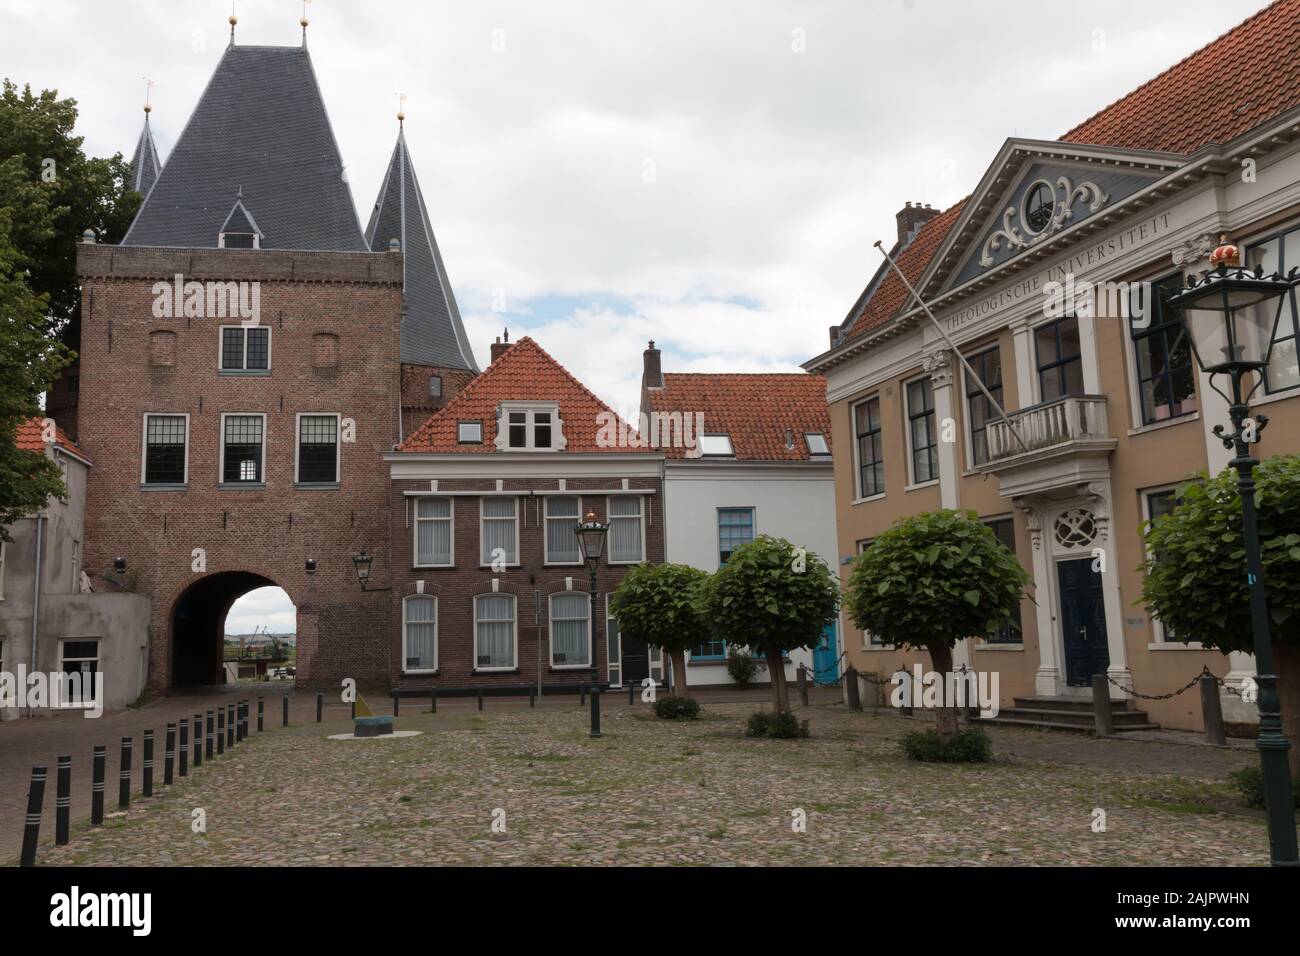 This photo from a old market place in make in the city Kampen in the Netherlands. Stock Photo